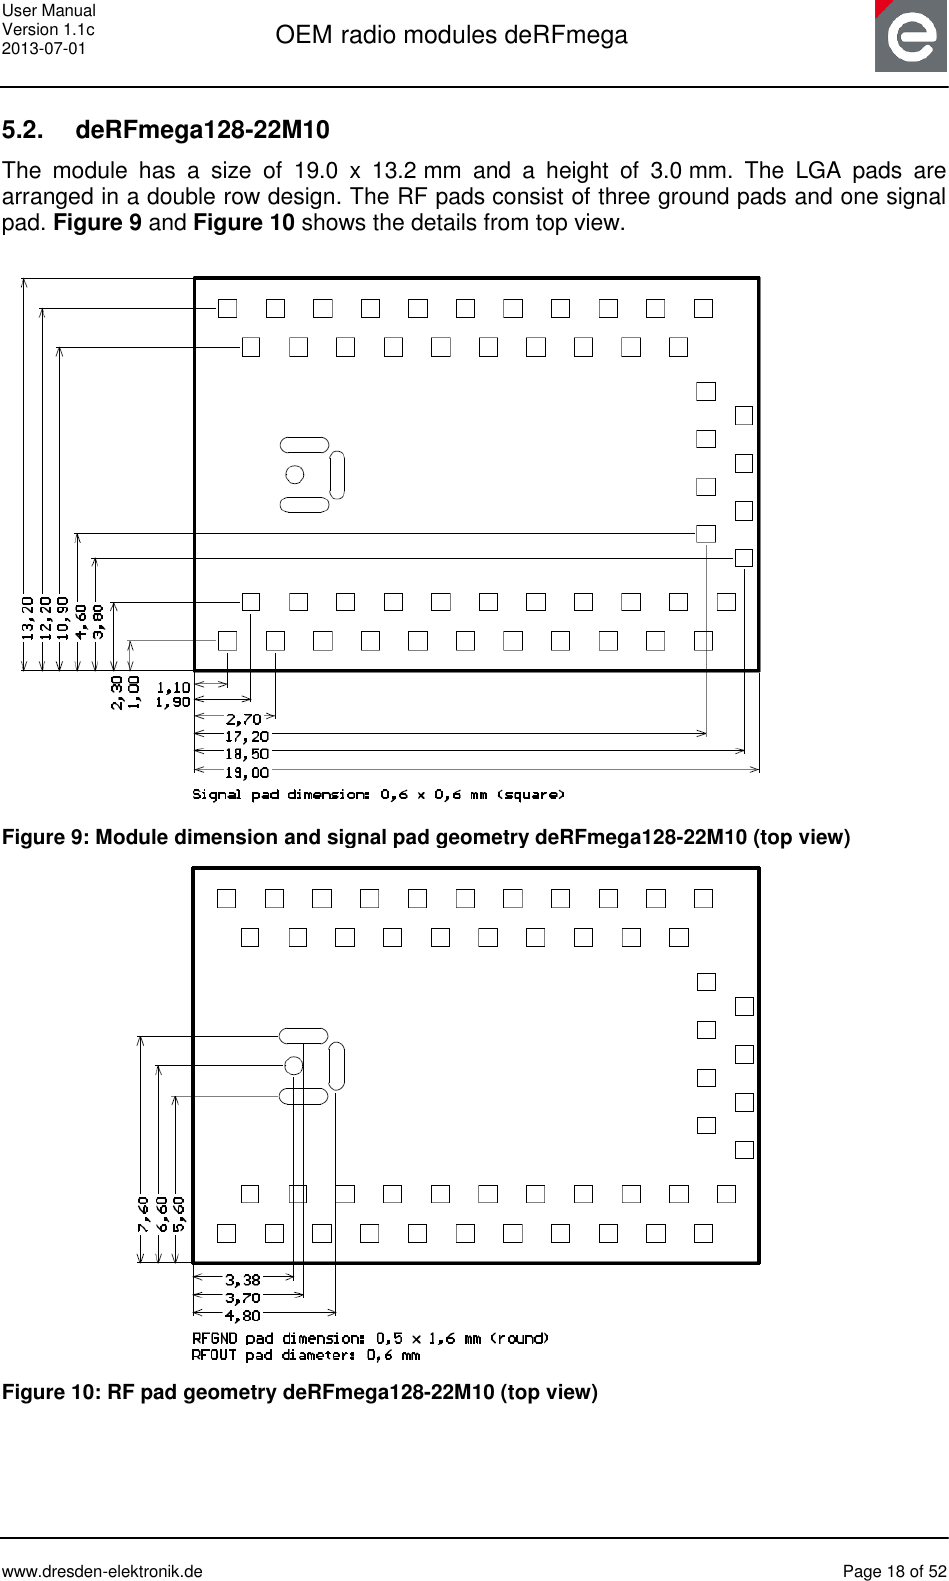 User Manual Version 1.1c 2013-07-01  OEM radio modules deRFmega      www.dresden-elektronik.de  Page 18 of 52  5.2.  deRFmega128-22M10 The  module  has  a  size  of  19.0  x  13.2 mm  and  a  height  of  3.0 mm.  The  LGA  pads  are arranged in a double row design. The RF pads consist of three ground pads and one signal pad. Figure 9 and Figure 10 shows the details from top view.   Figure 9: Module dimension and signal pad geometry deRFmega128-22M10 (top view)                        Figure 10: RF pad geometry deRFmega128-22M10 (top view) 